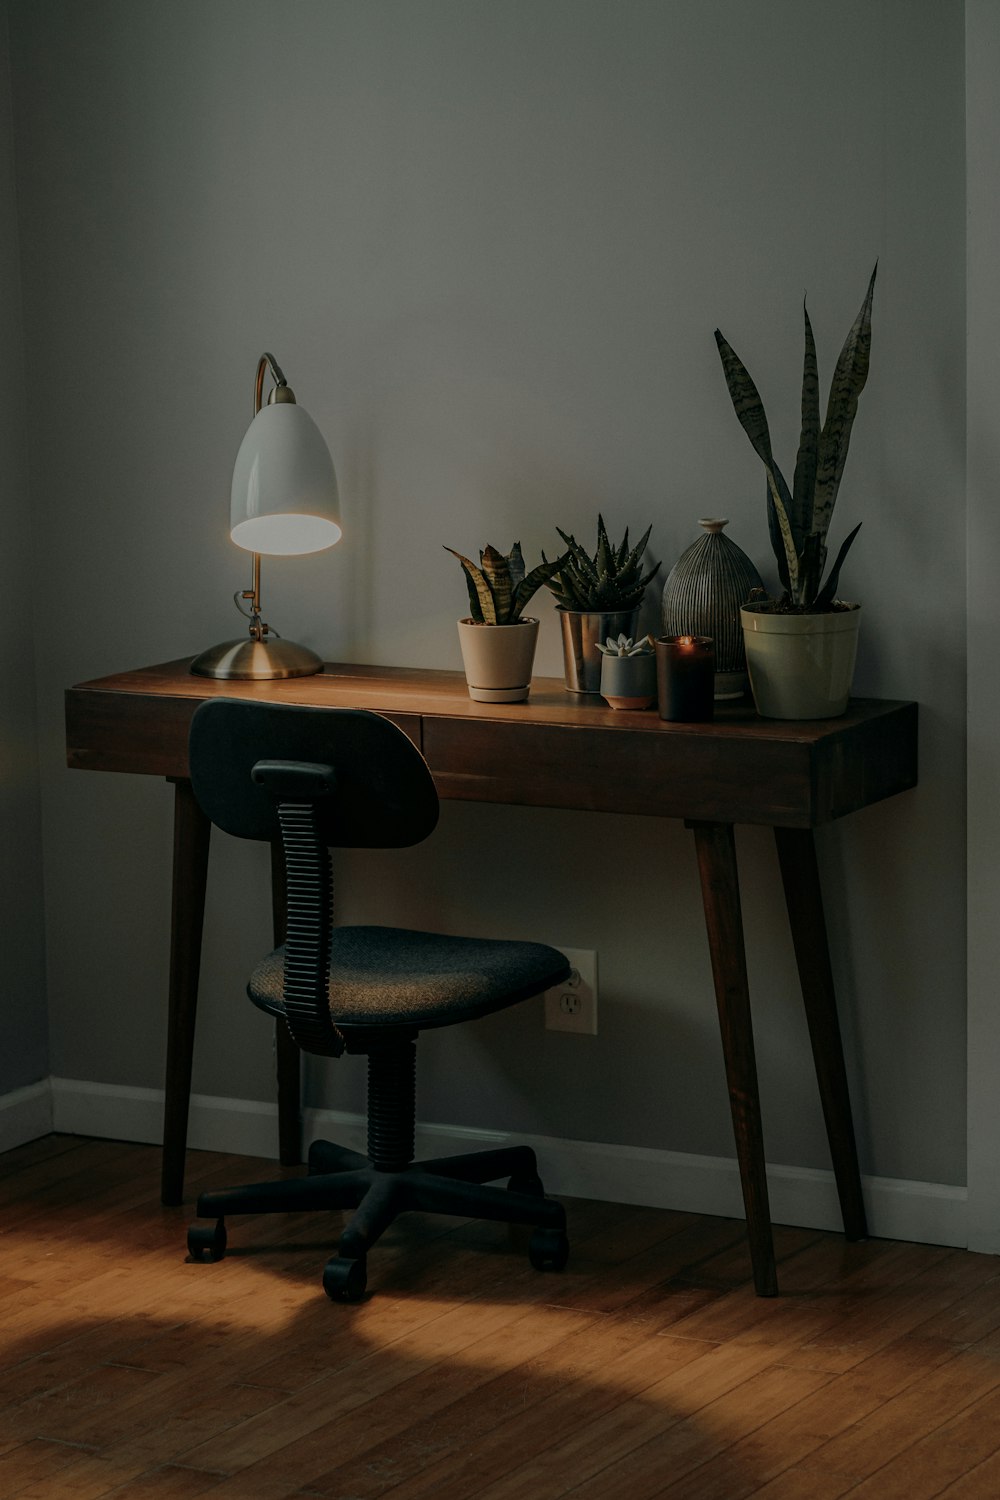 a desk with a lamp and some plants on it